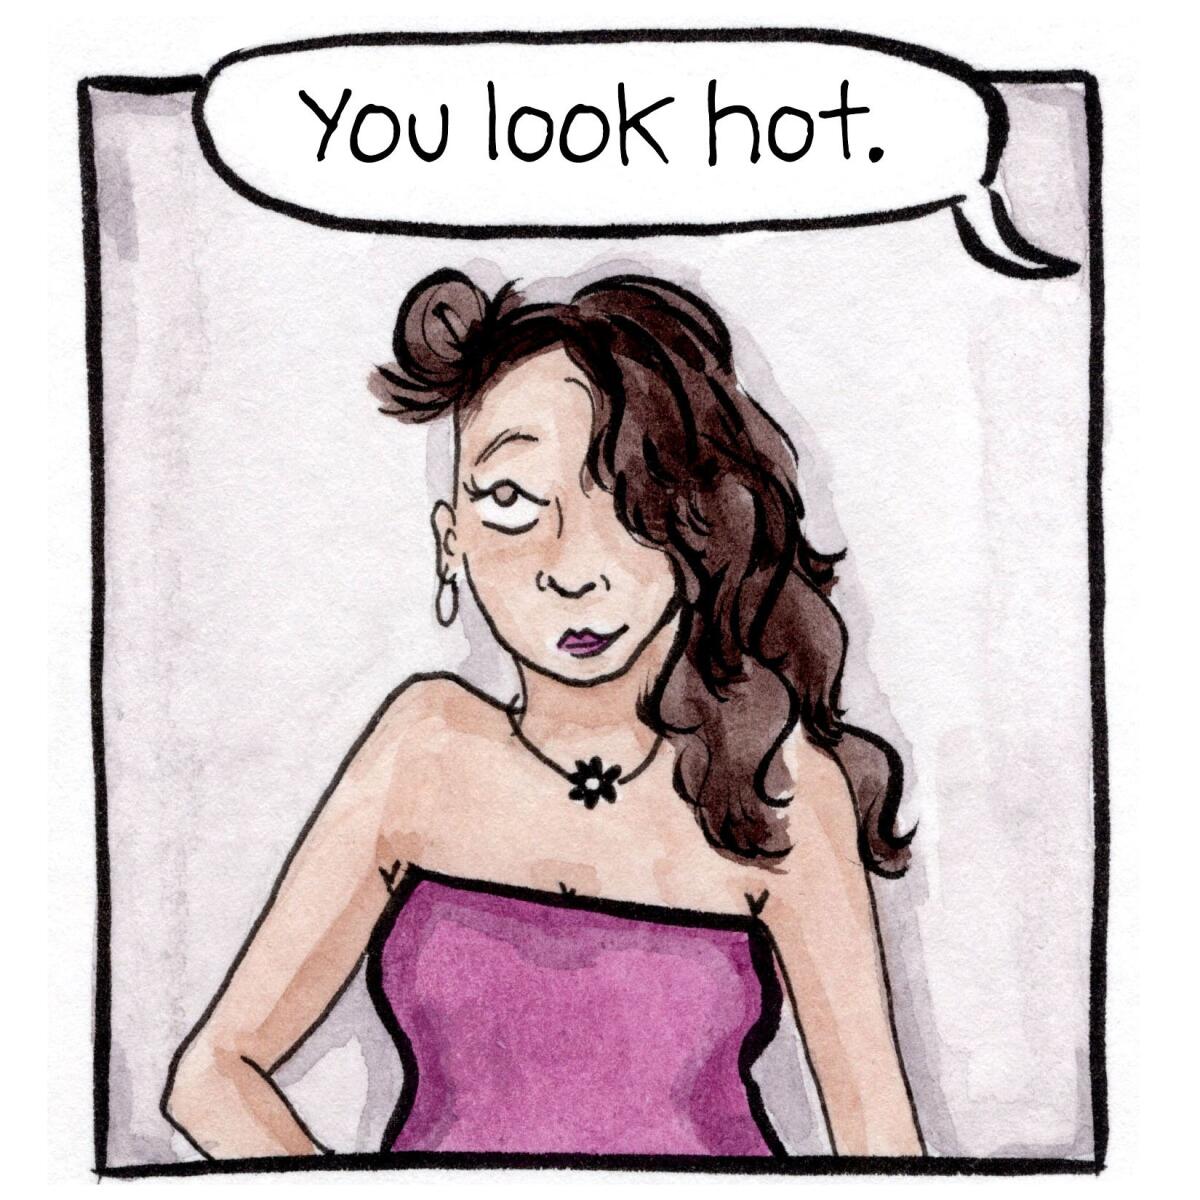 Someone says, "You look hot," to a young woman wearing makeup and a strapless pink top.